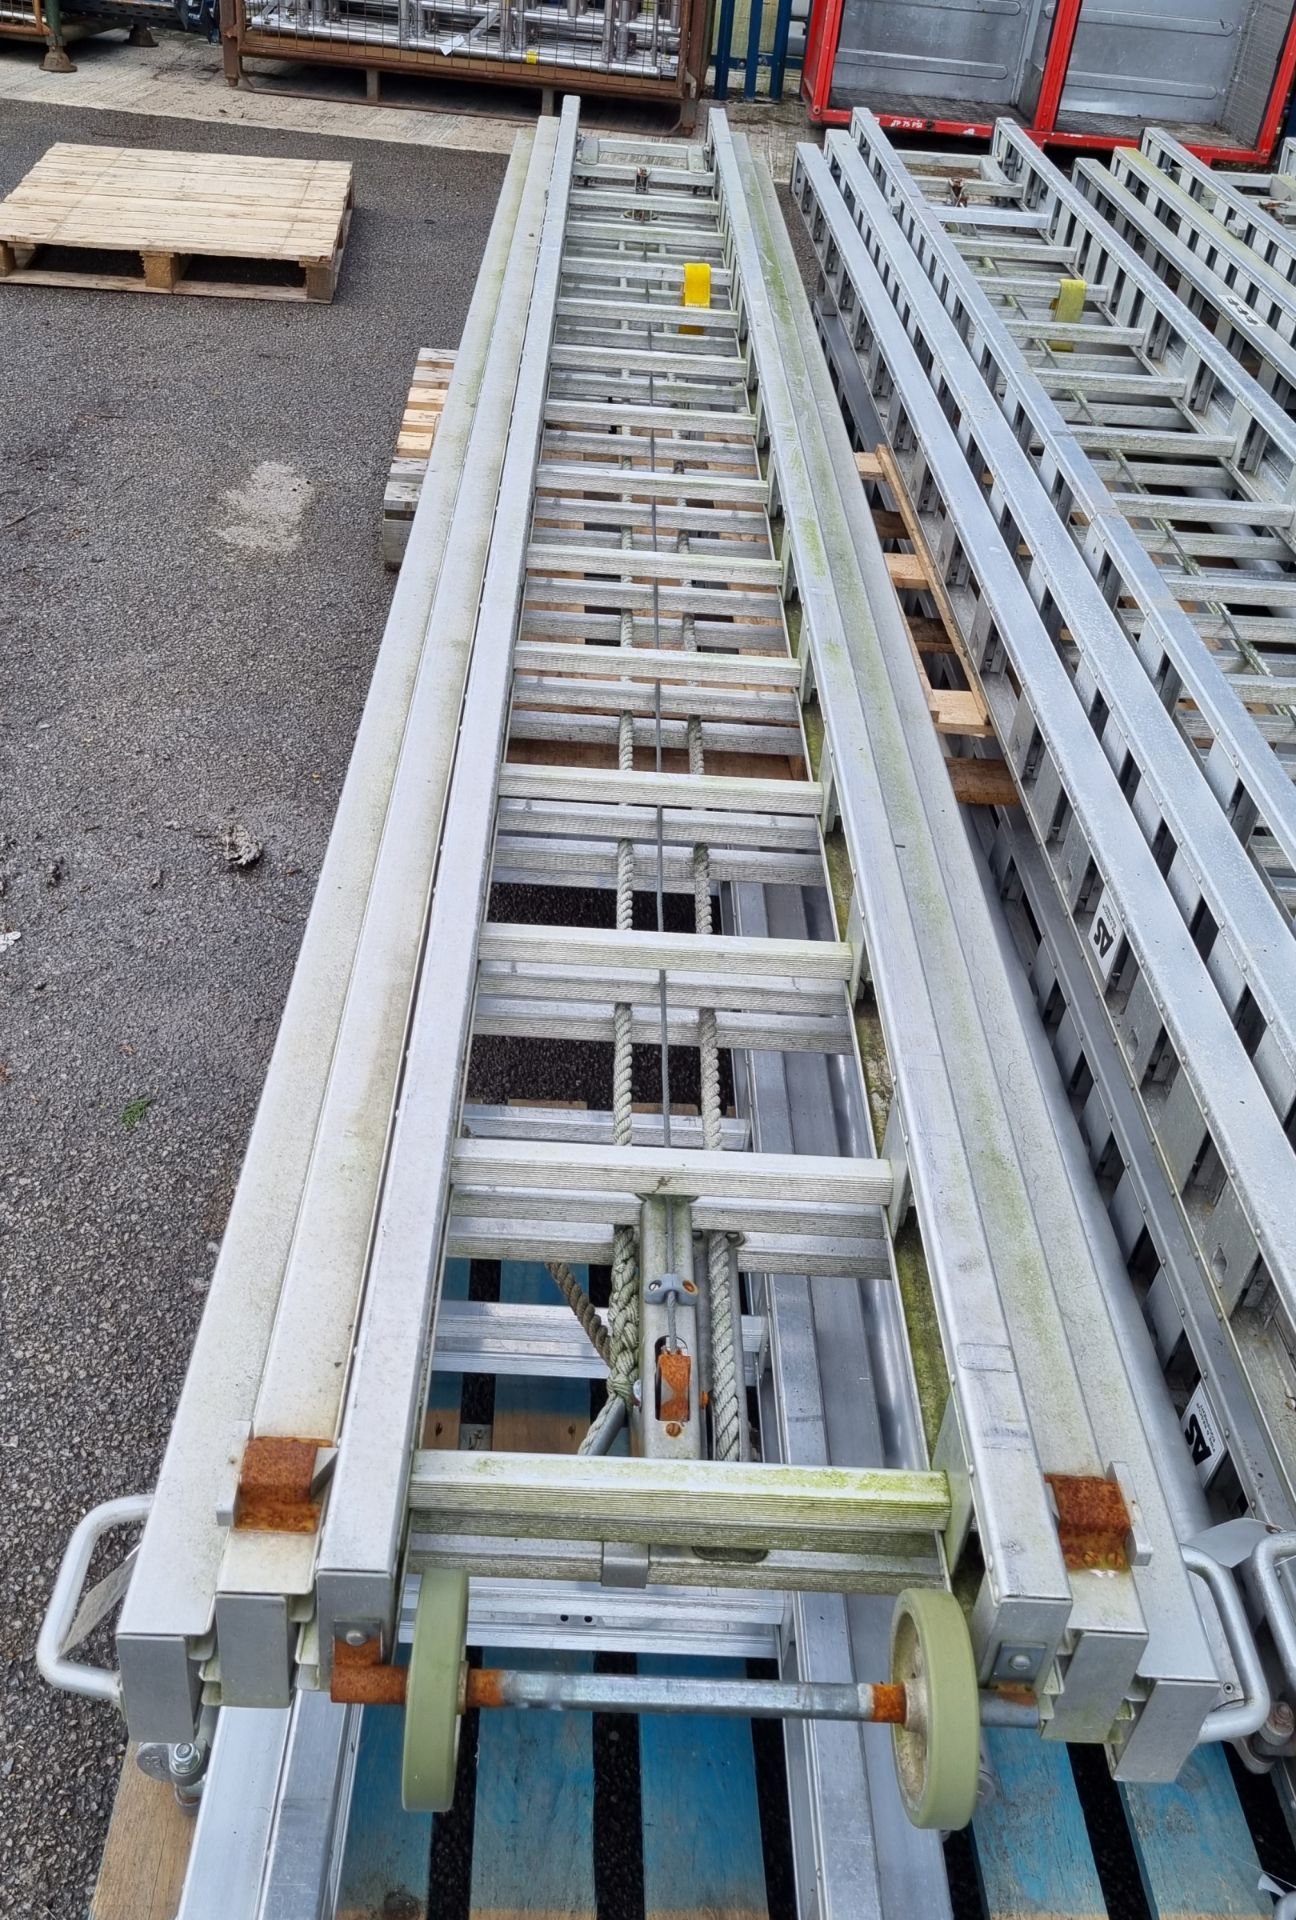 AS Fire & Rescue equipment ladder - 3 section - 14 rungs per section - approx 4M in length - Image 2 of 3